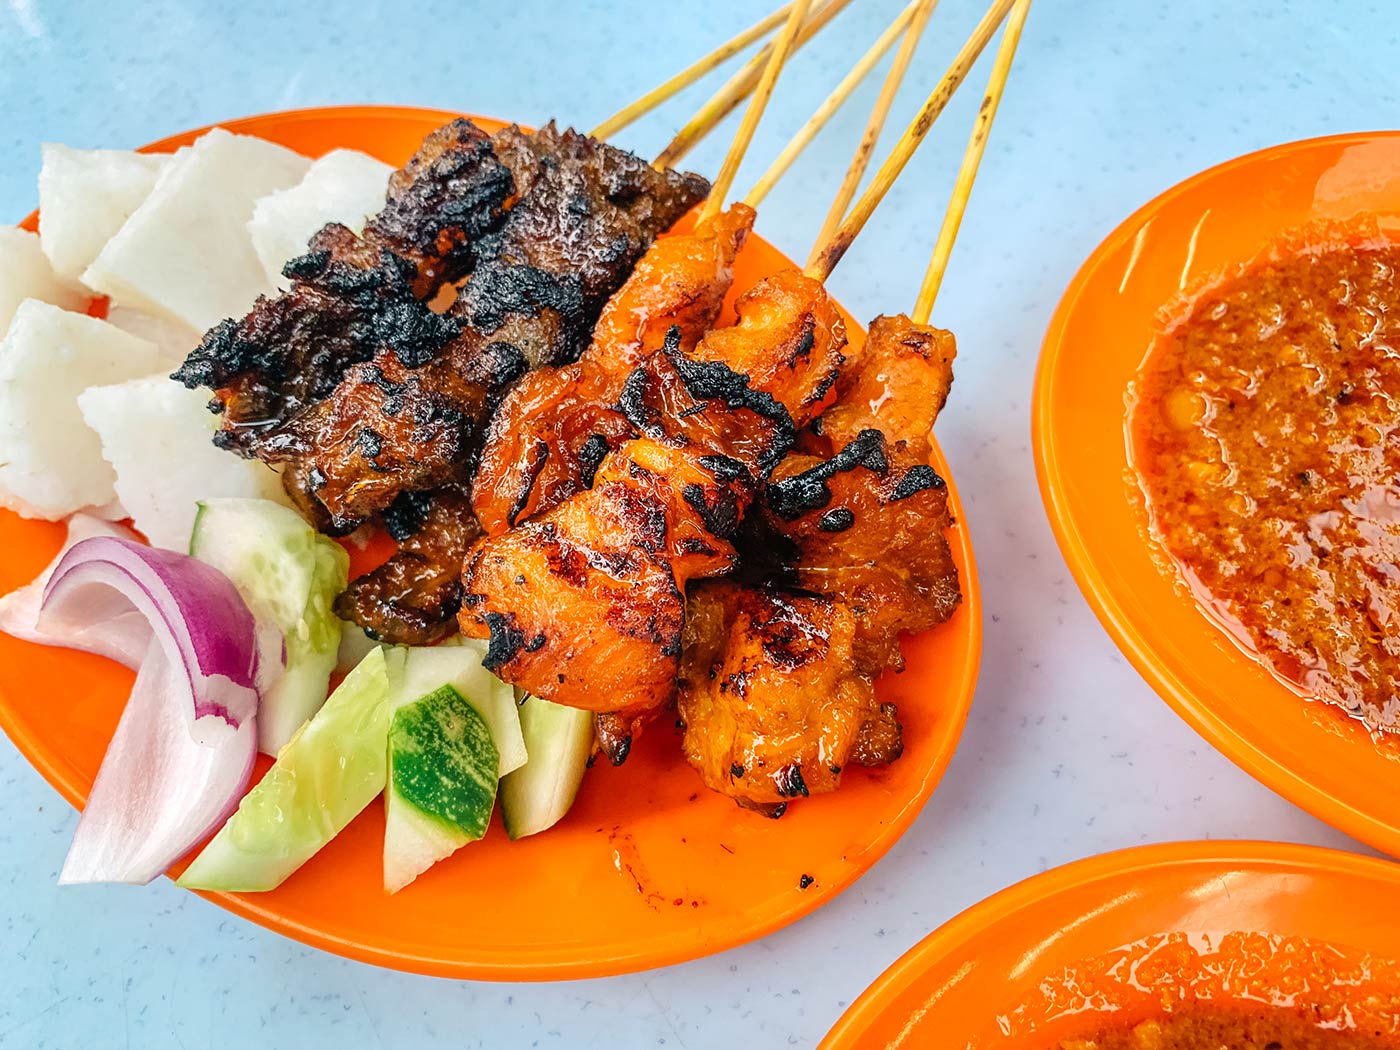 Top foods to try in Georgetown - Penang, Malaysia blog post | Satay